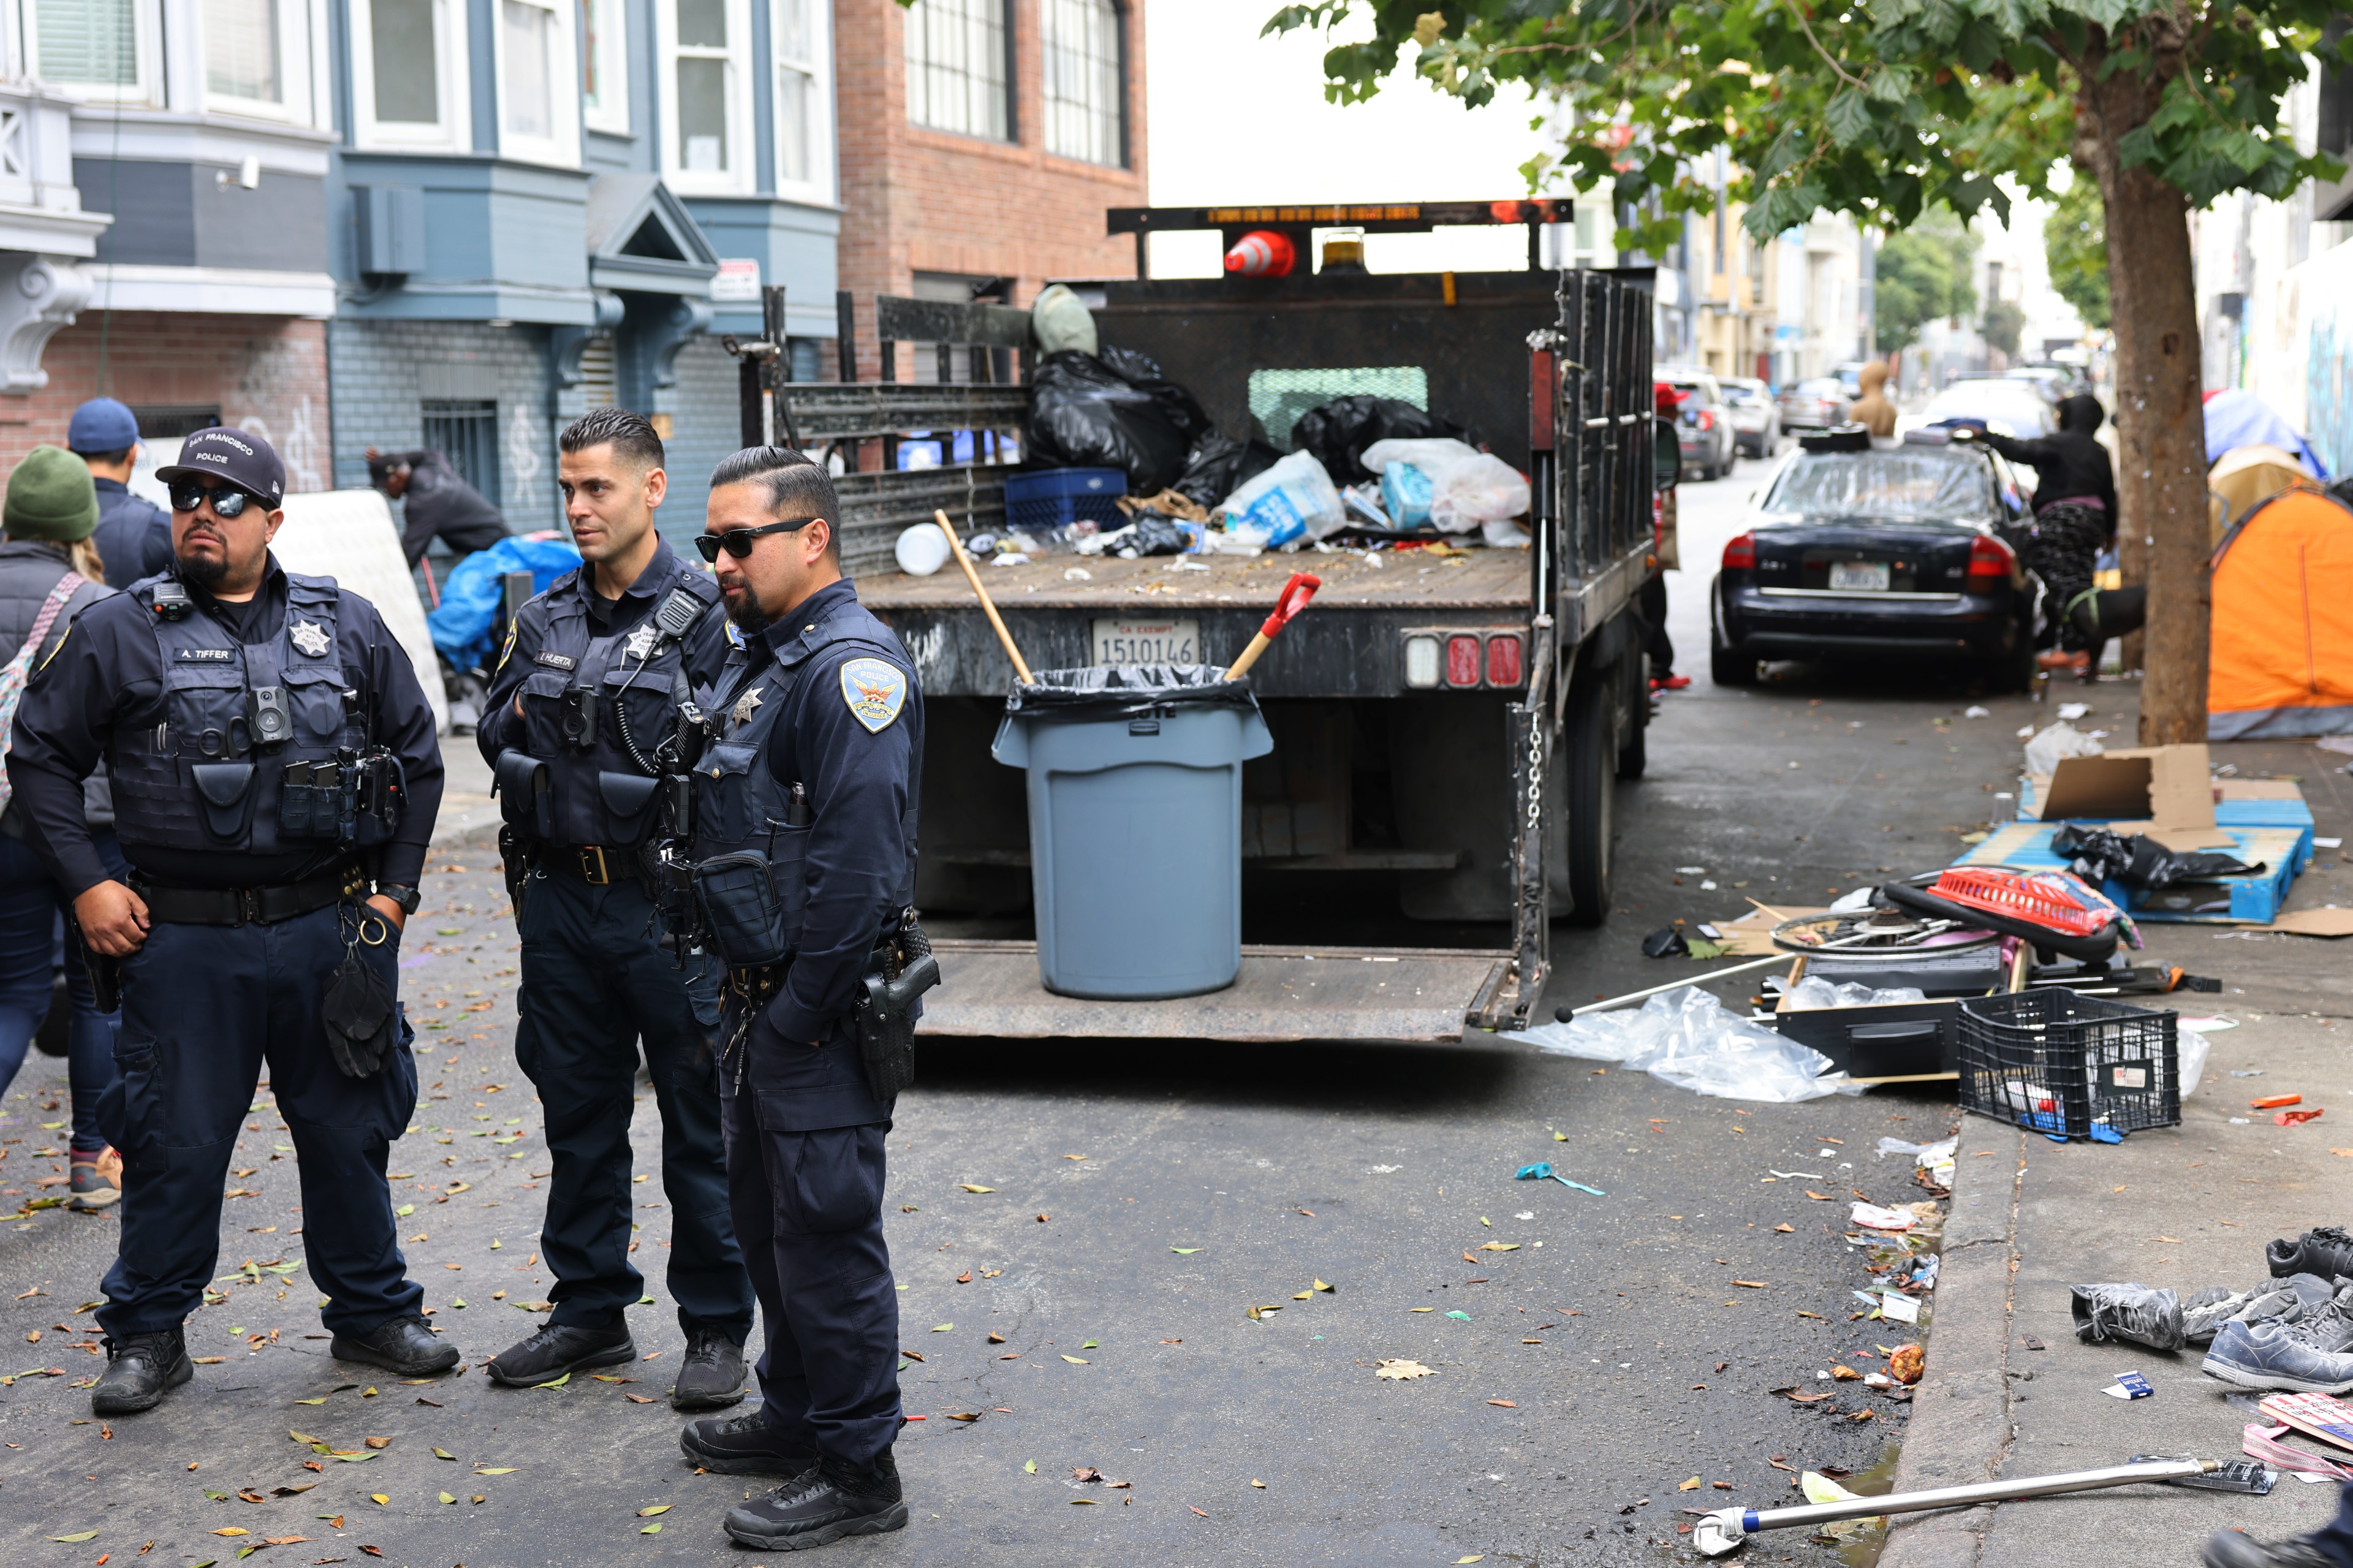 Three officers stand by a garbage truck and litter on an urban street, with tents in the background suggesting a homeless encampment.